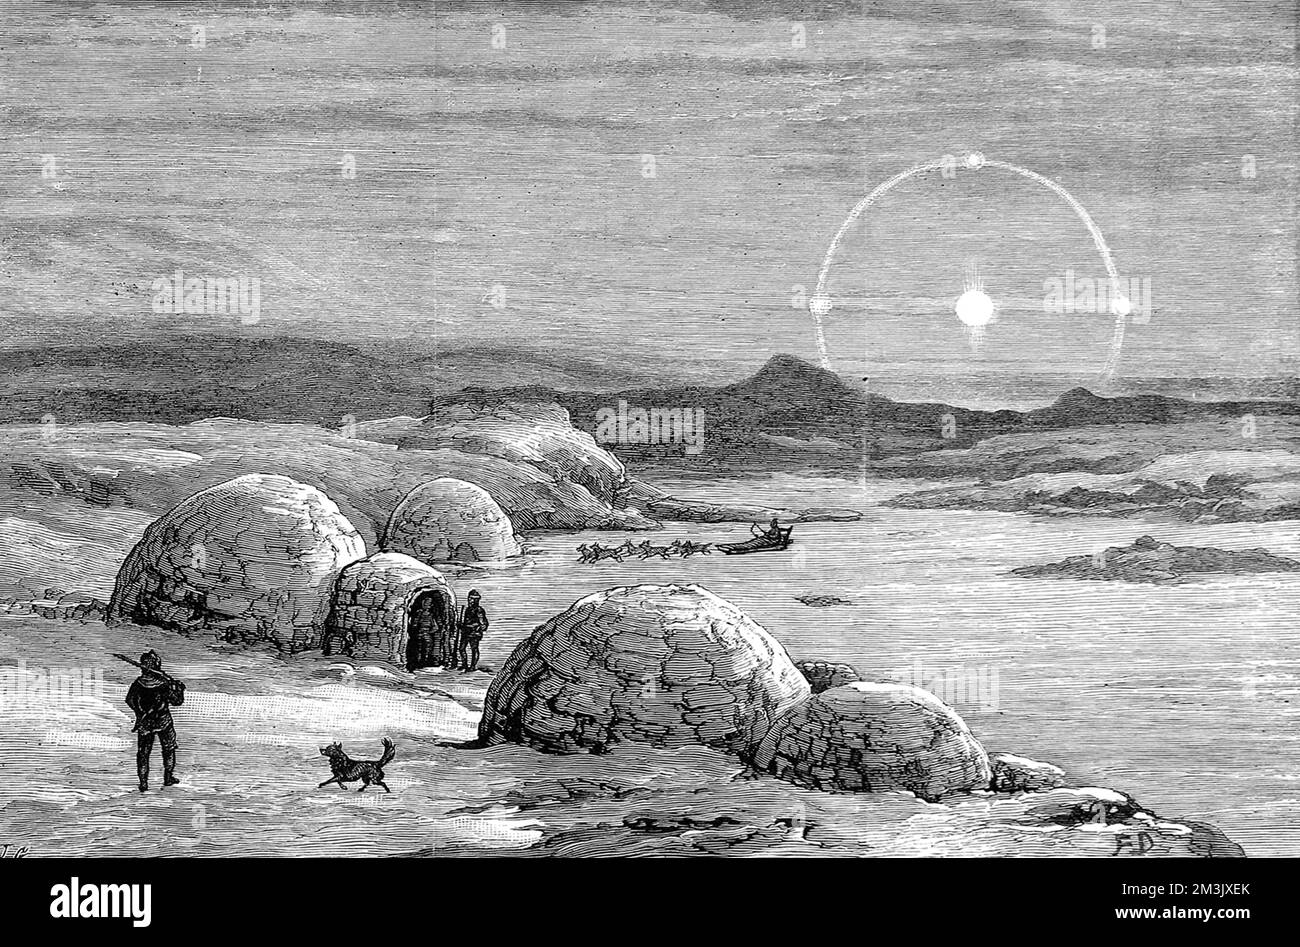 The igloos on Lake Daly of the American Franklin Search Expedition of 1878-1880. This expedition was one of many to search the Arctic for signs of Sir John Franklin's ill-fated Arctic expedition of 1845.  In 1845 the British Admiralty sent two polar exploration ships, HMS 'Erebus' and HMS 'Terror', to look for the Northwest passage round the northern coast of Canada. The expedition, commanded by Sir John Franklin, disappeared from view late in 1845 and none of the men were ever seen again.   In fact the ships made it to the King William Island region, then got stuck in the ice. With supplies r Stock Photo